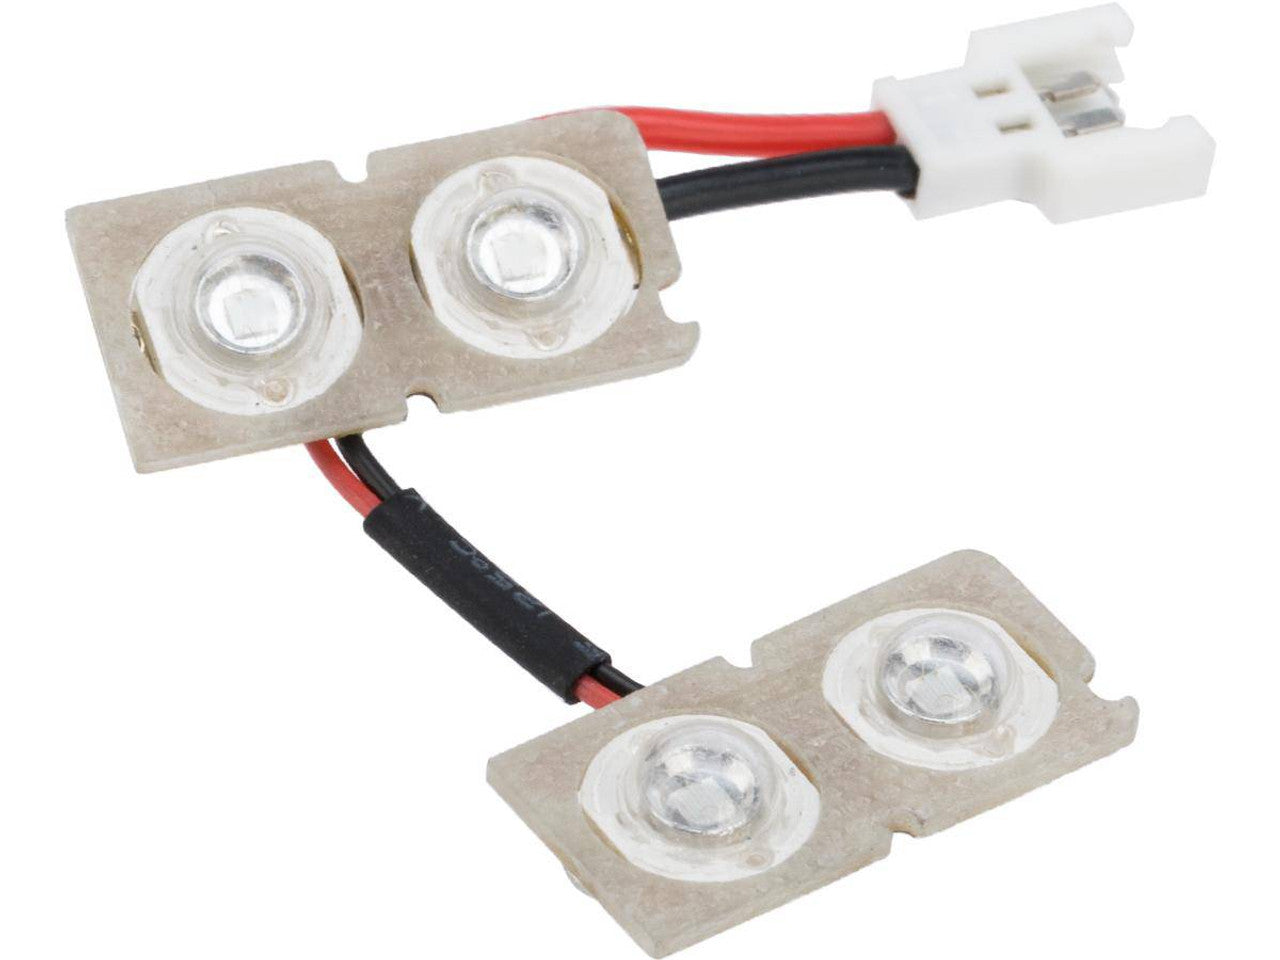 Maxx Model Dual LED Boards and Module Tracer Set for Maxx Model M4 / M16 Hop-up Series (Type: ME / MI Hop-up)